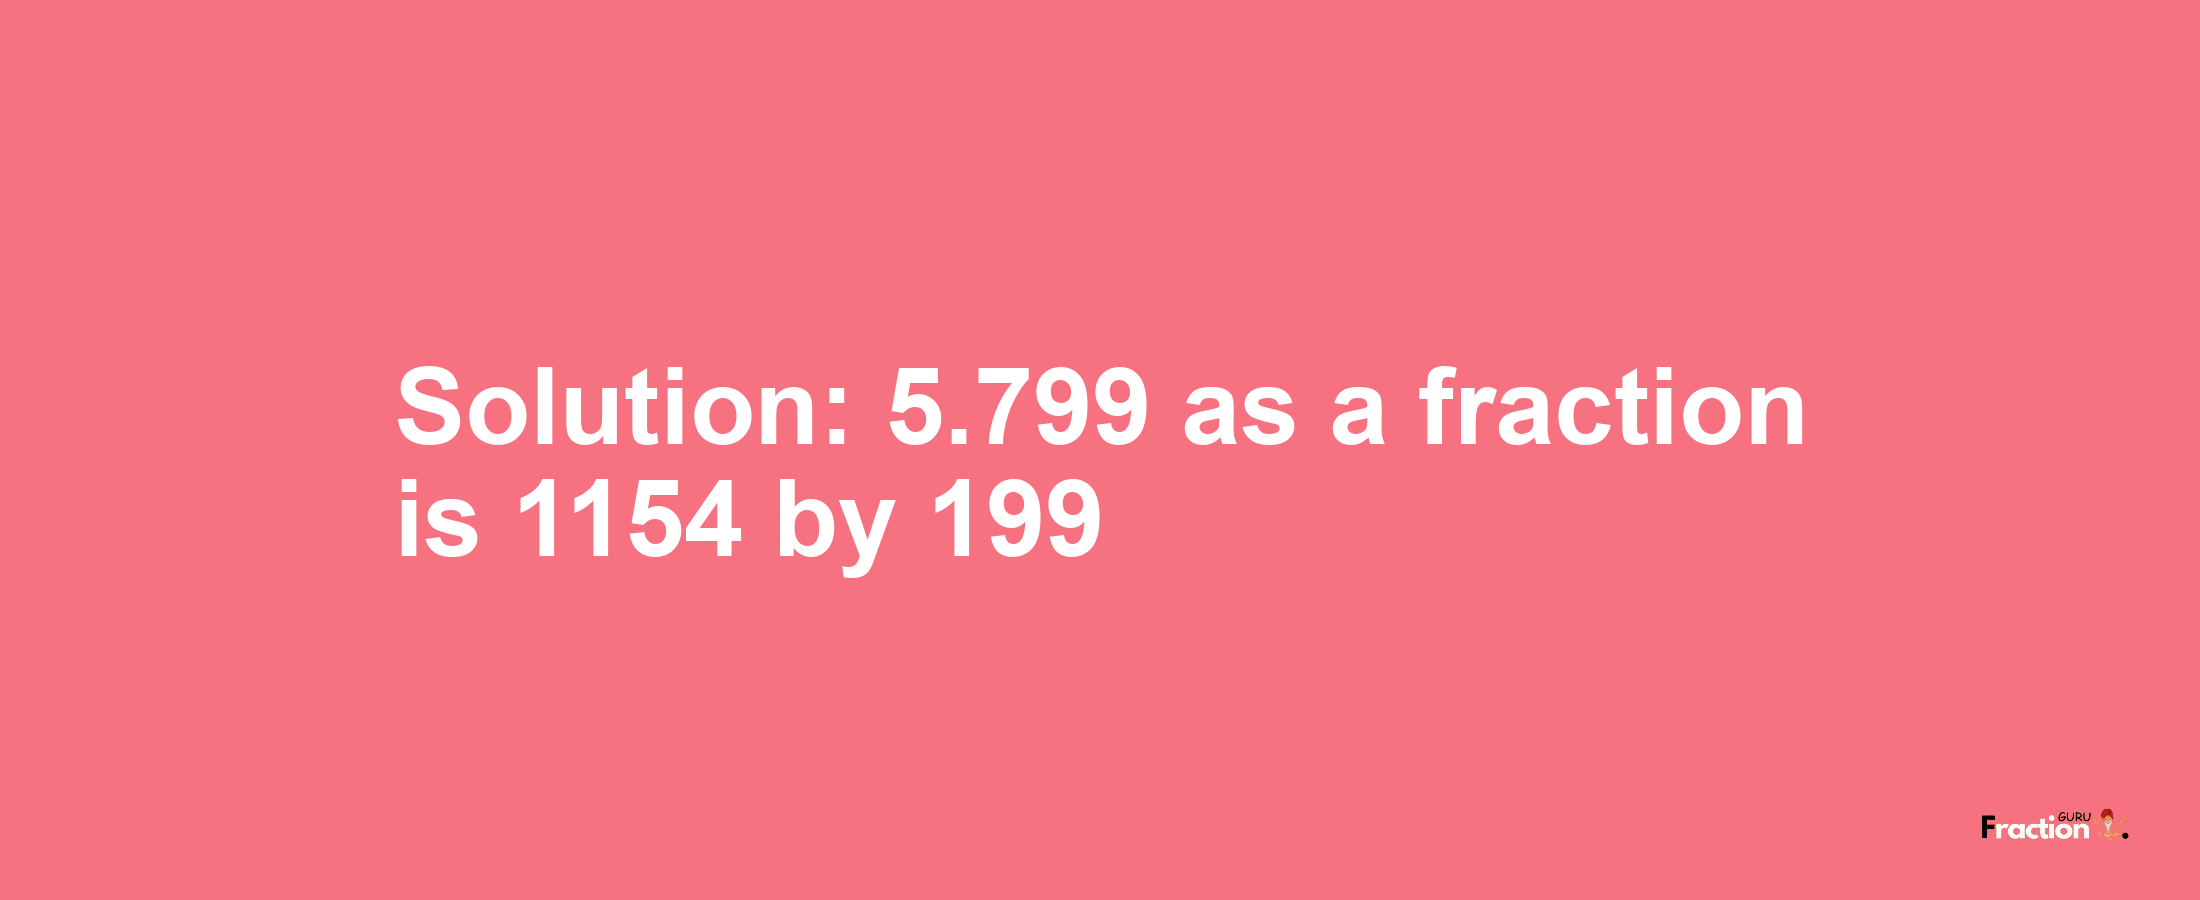 Solution:5.799 as a fraction is 1154/199